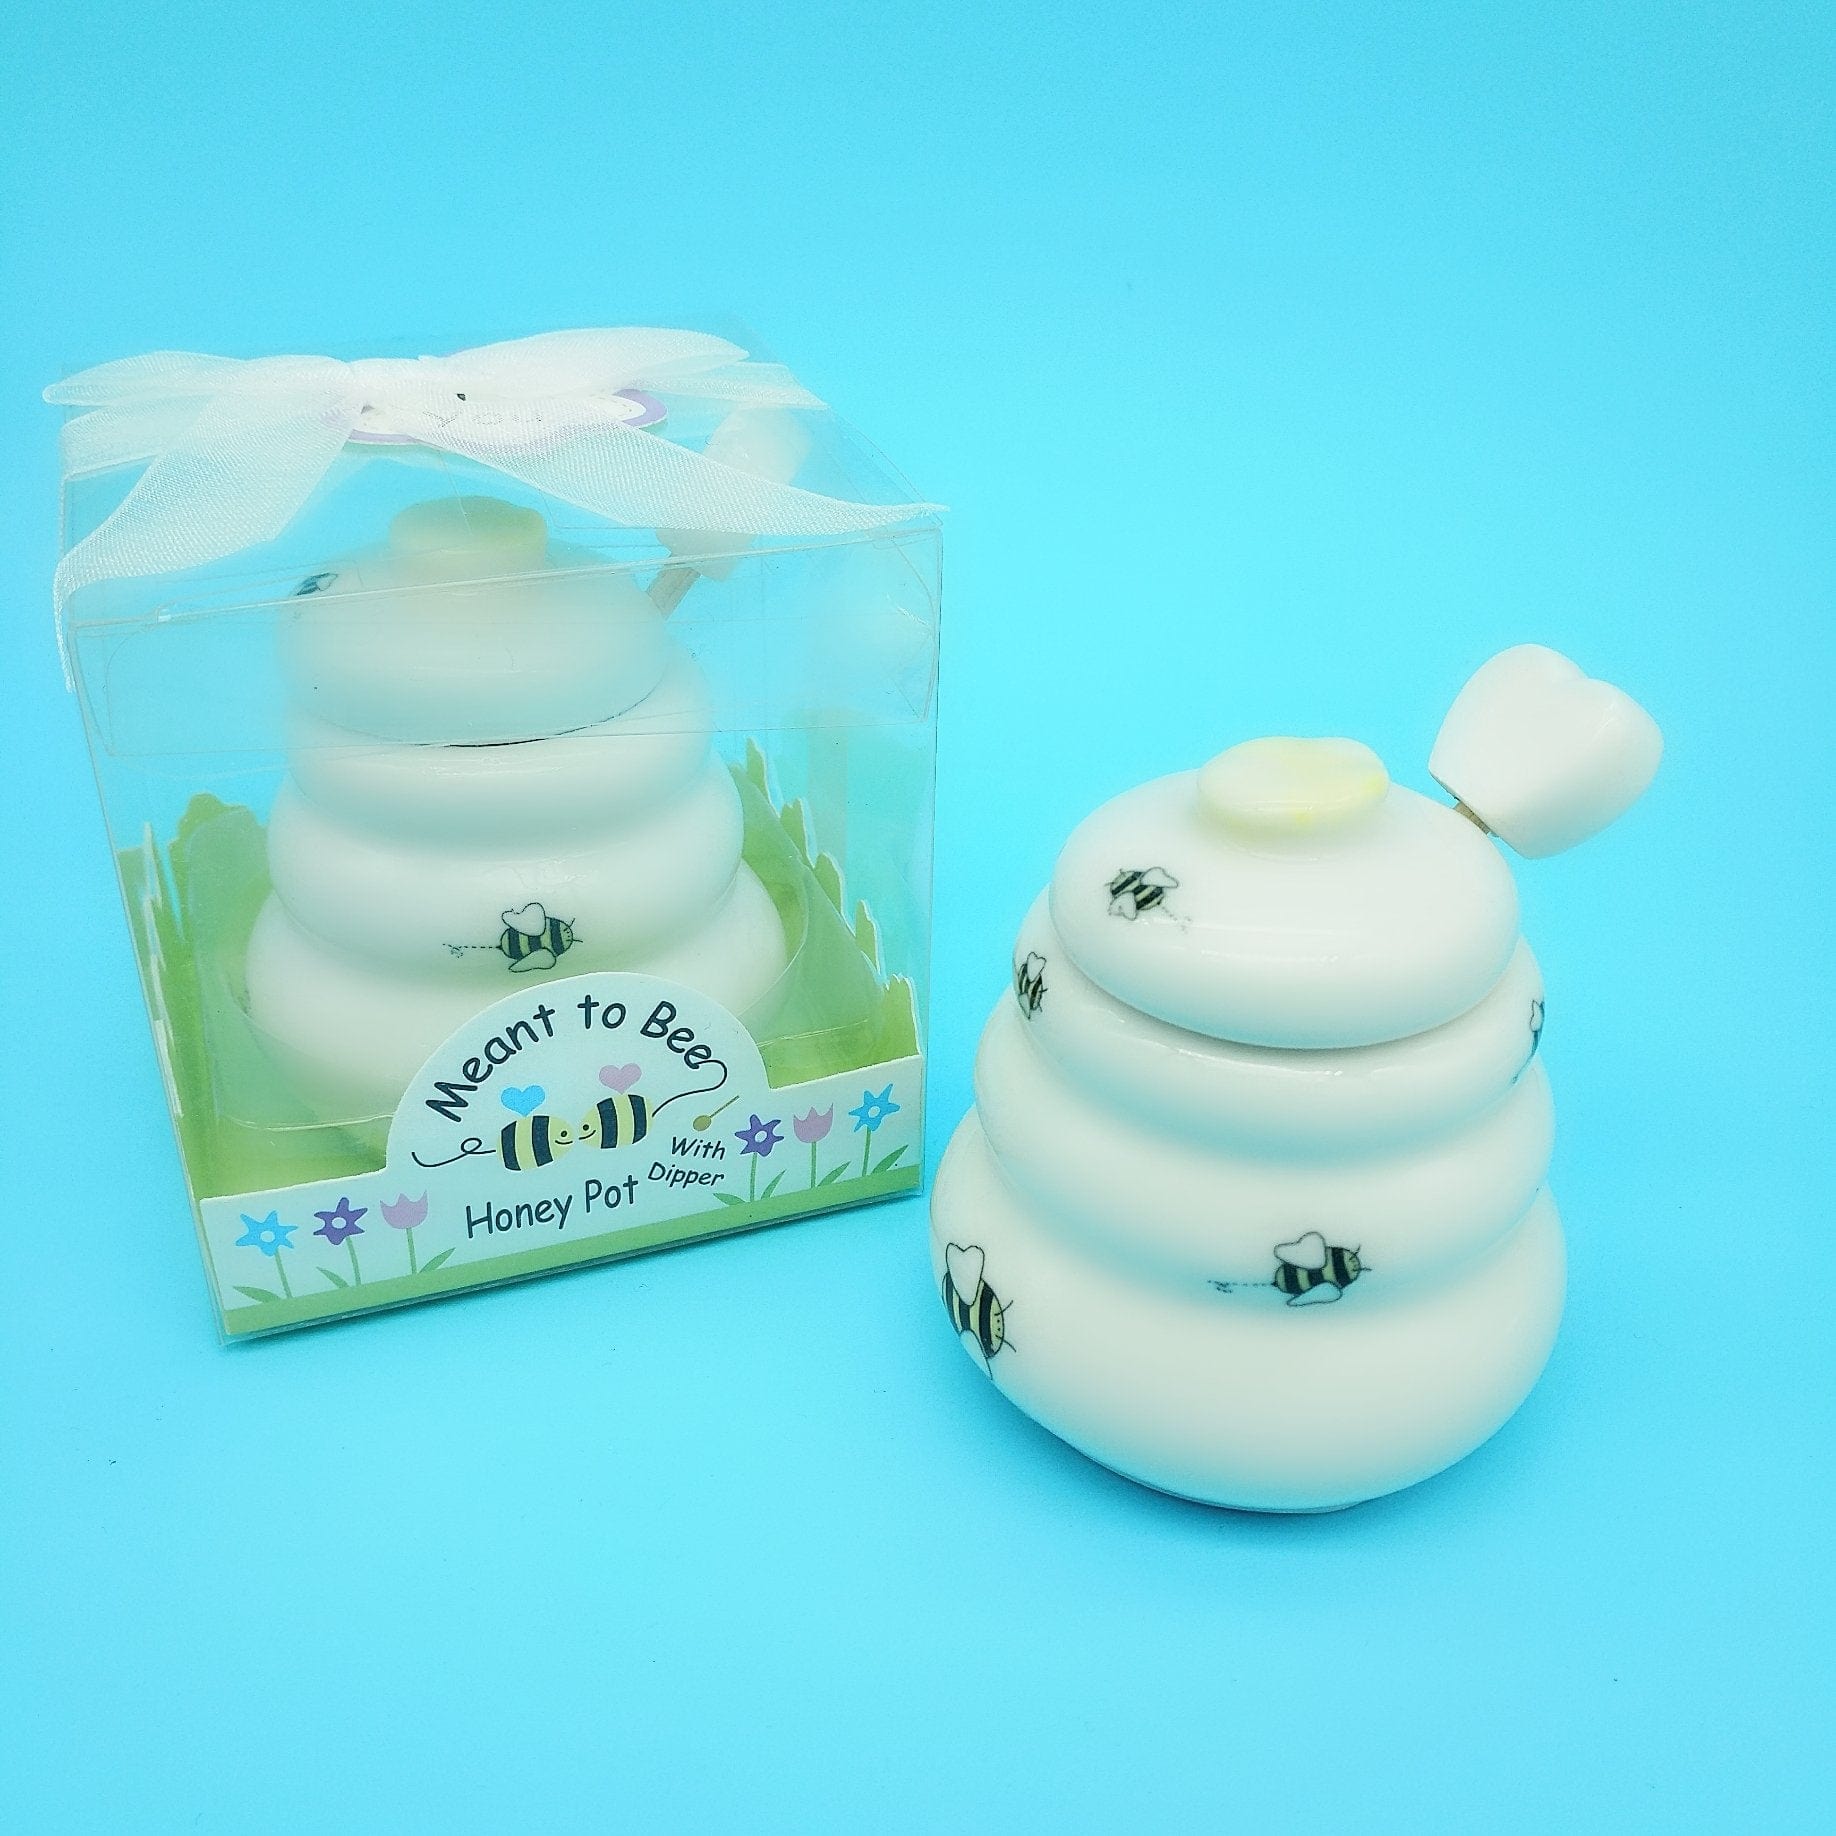 Honey Bee Salt and Pepper Shakers and Honey Pot--TOO cute! - The Pink Pigs, A Compassionate Boutique